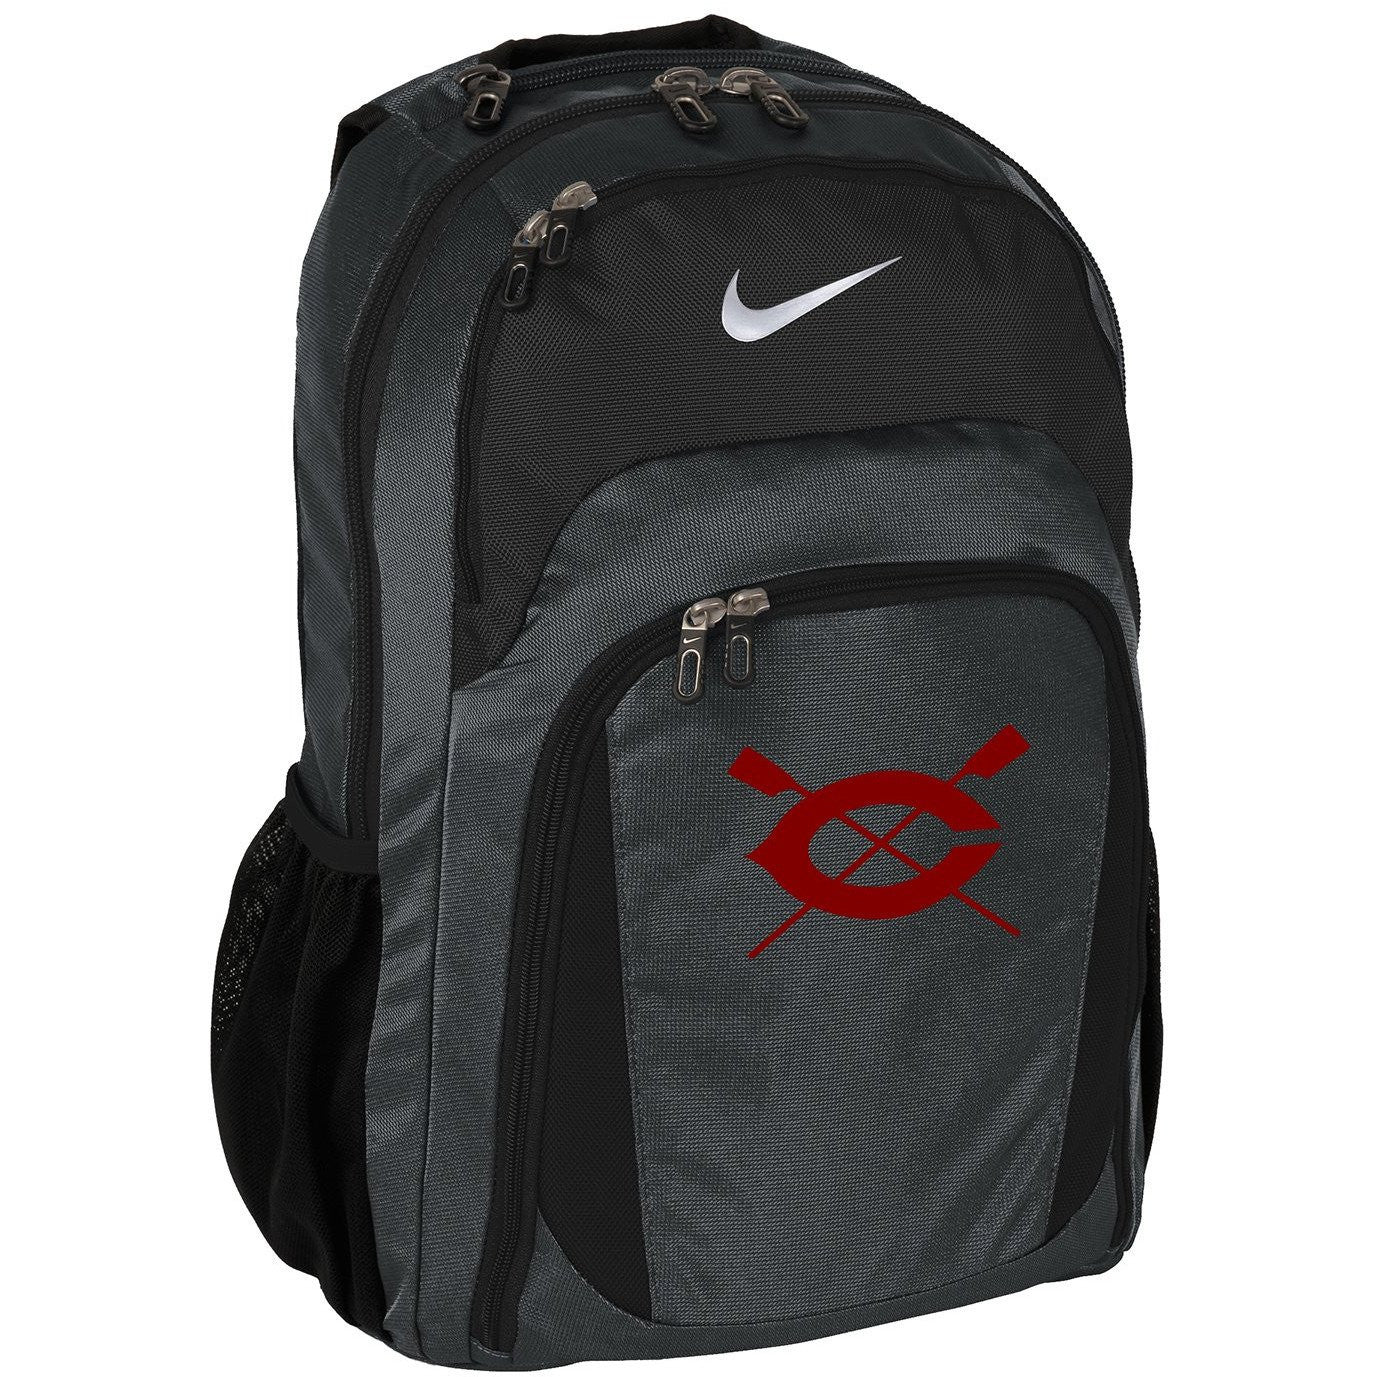 University of Chicago Rowing Team Nike Back Pack